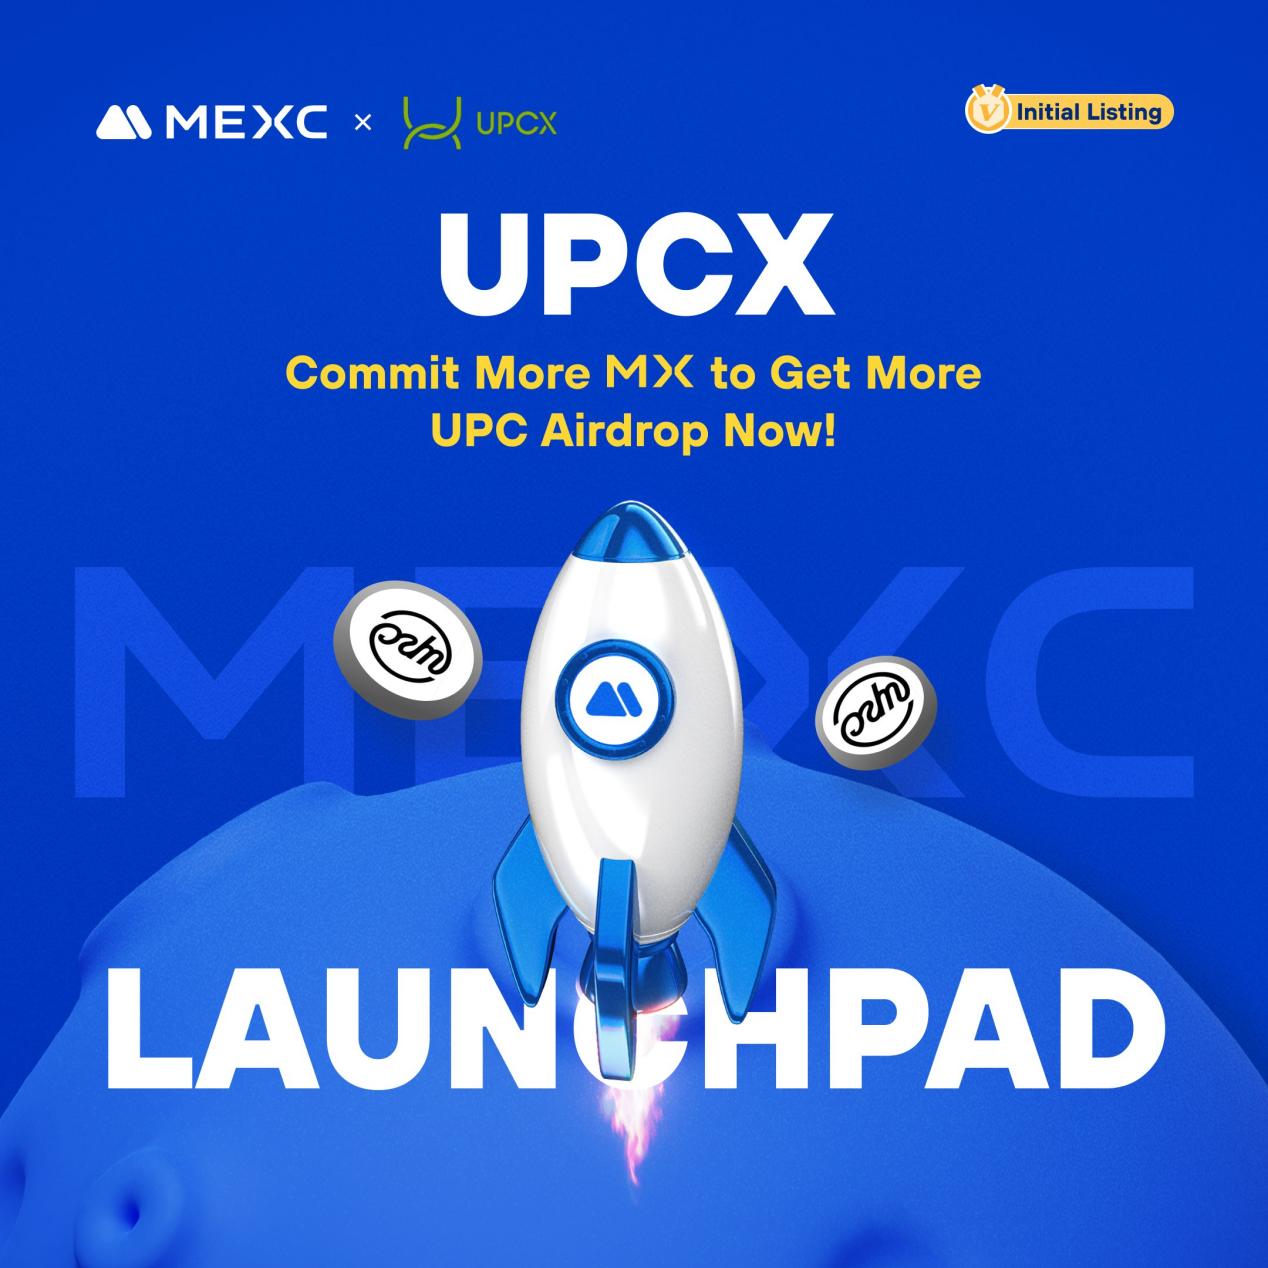 , UPCX (UPC) token is set to be listed on the MEXC trading platform soon